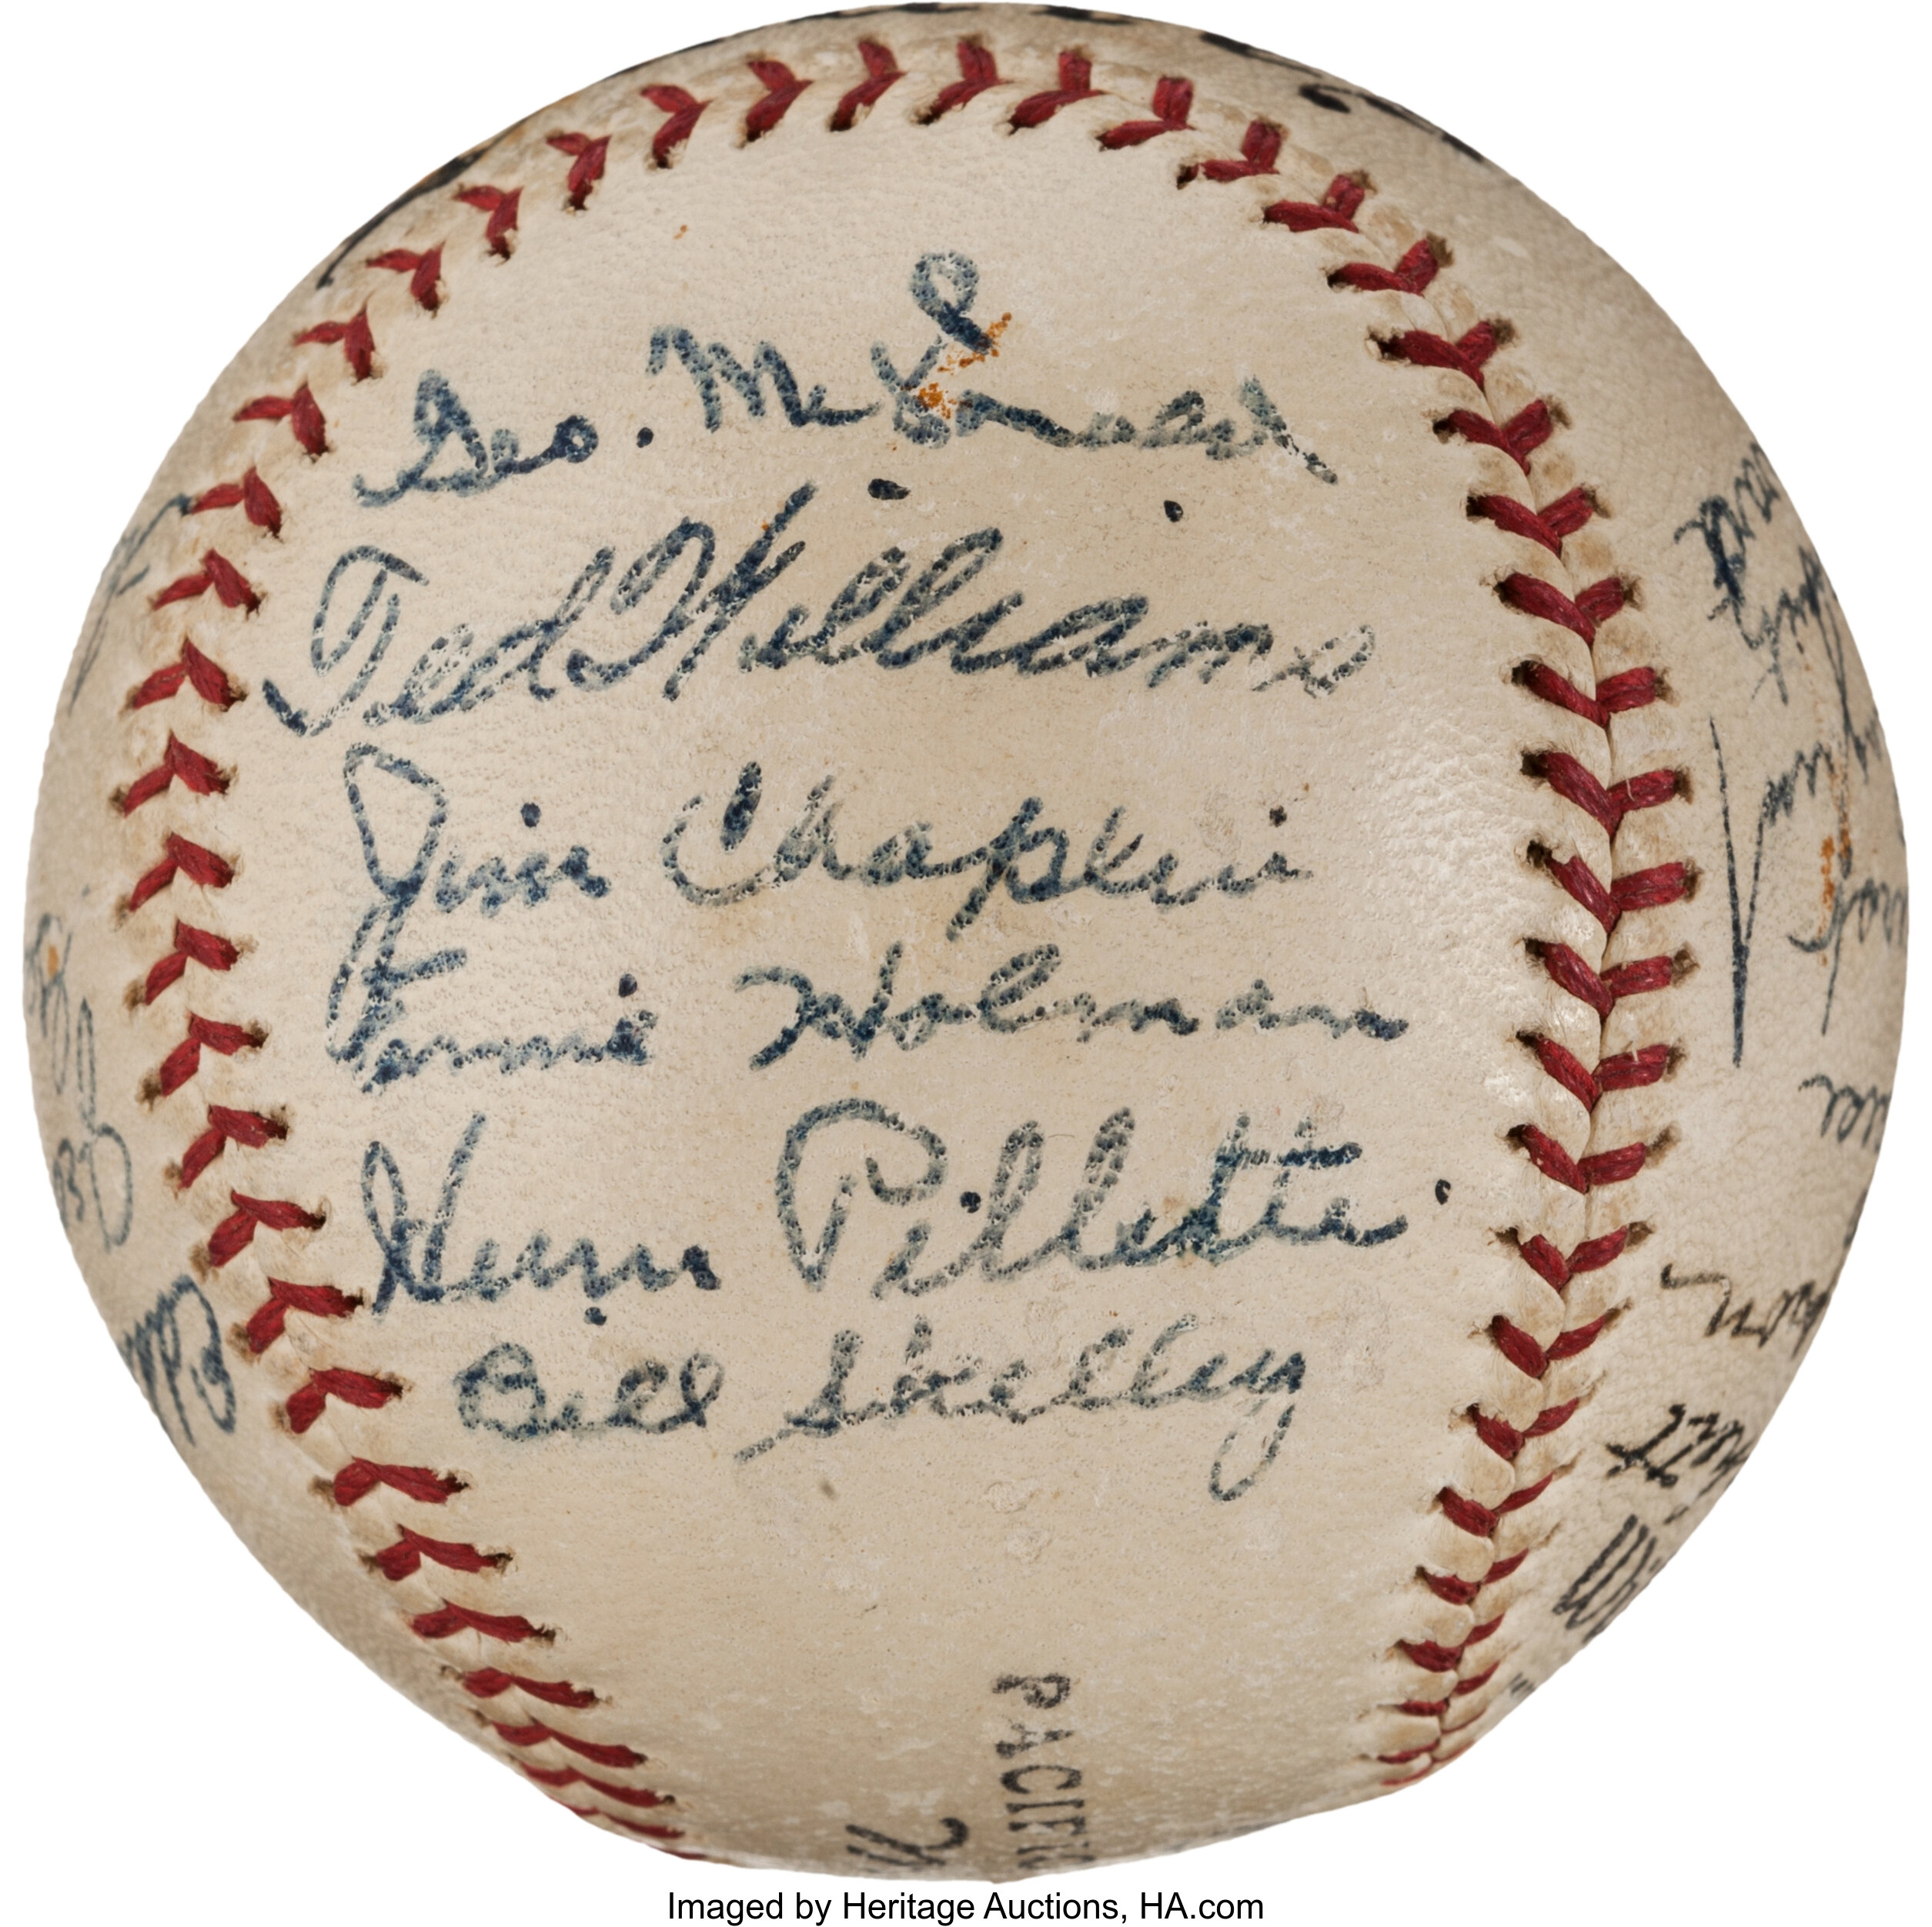 1937 San Diego Padres Team Signed Minor League Baseball With Early